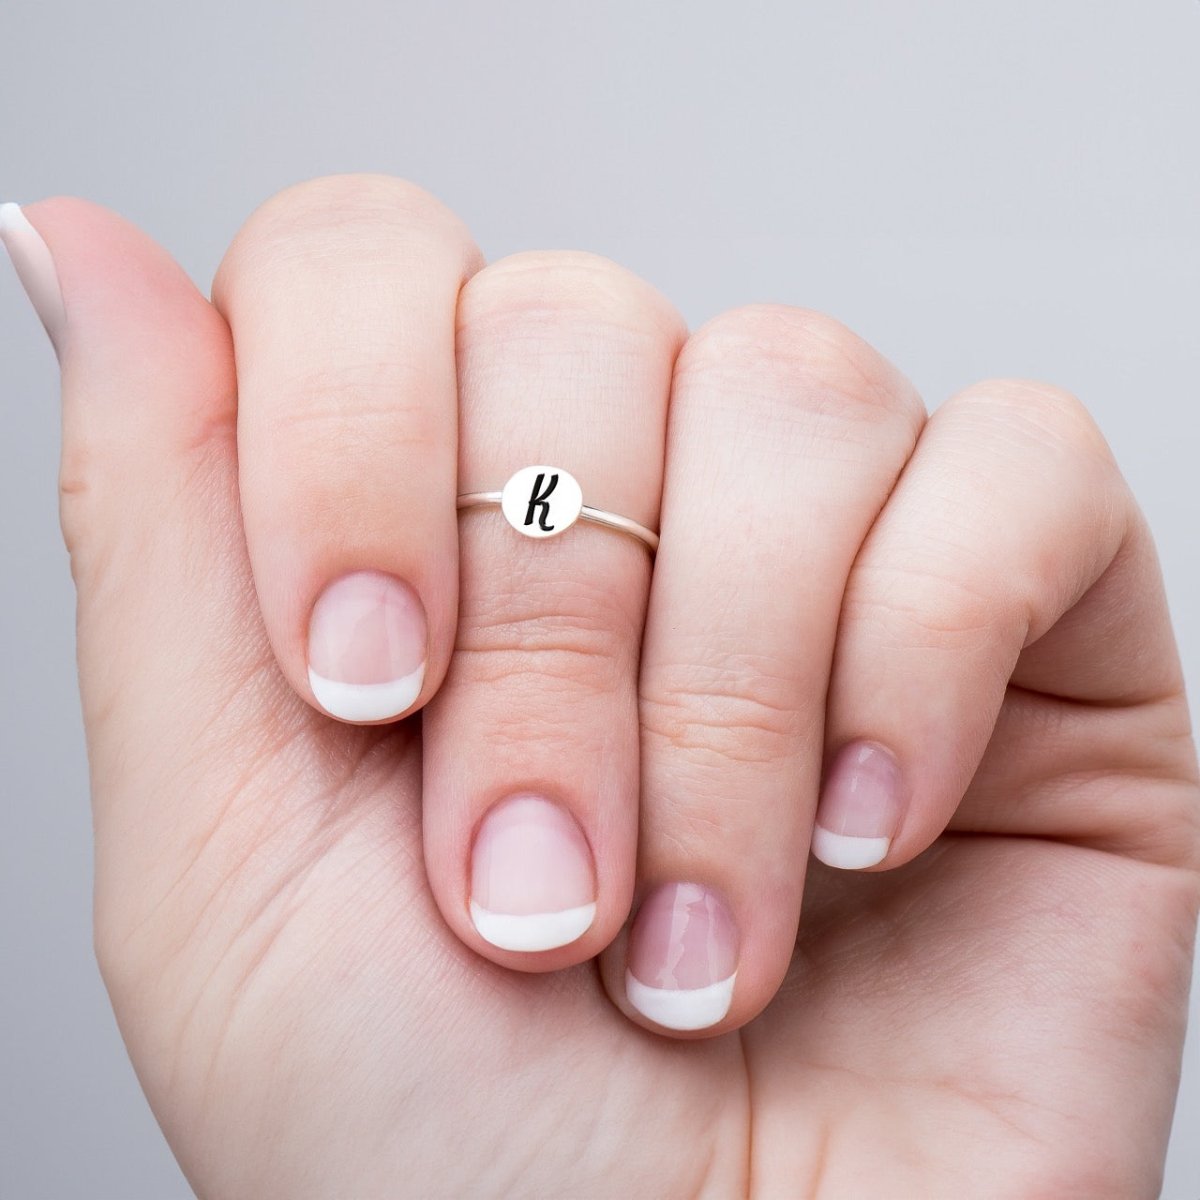 Personalized Initial Ring